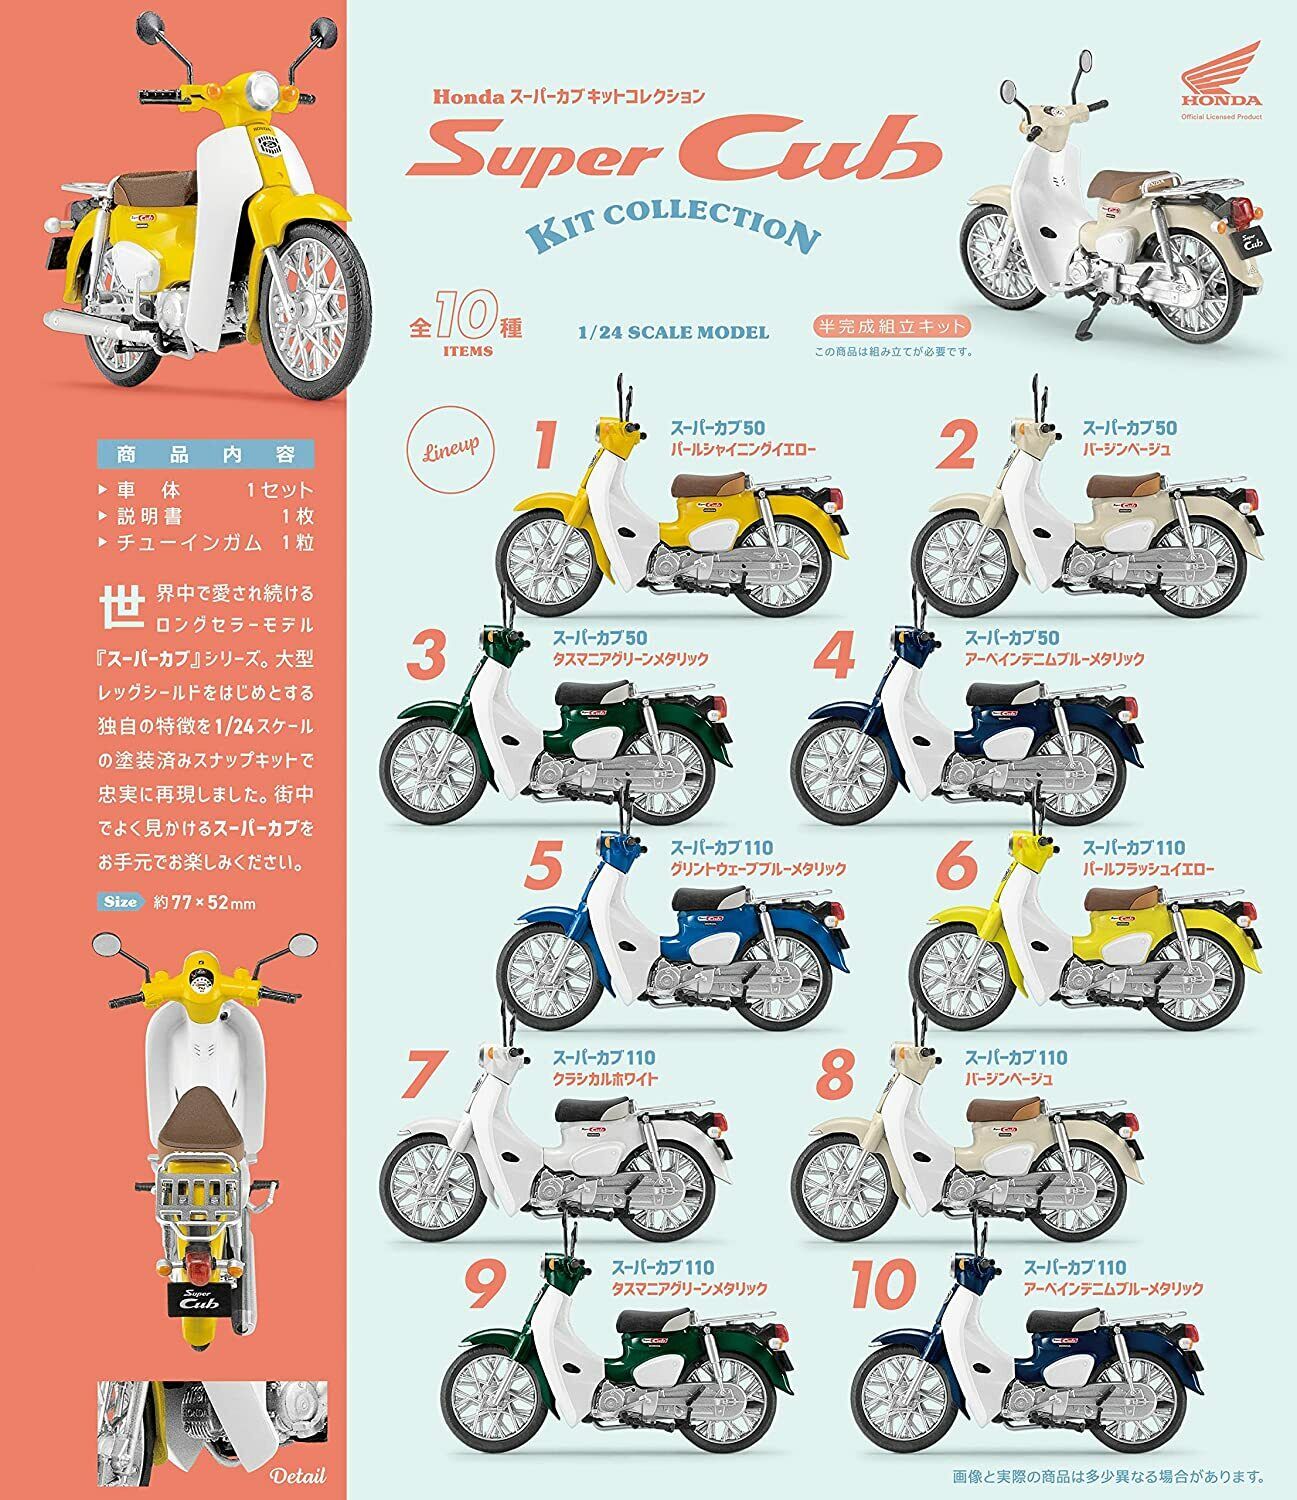 Honda Super Cub Kit Collection 10 type set / Figure Real motorcycle Preorder